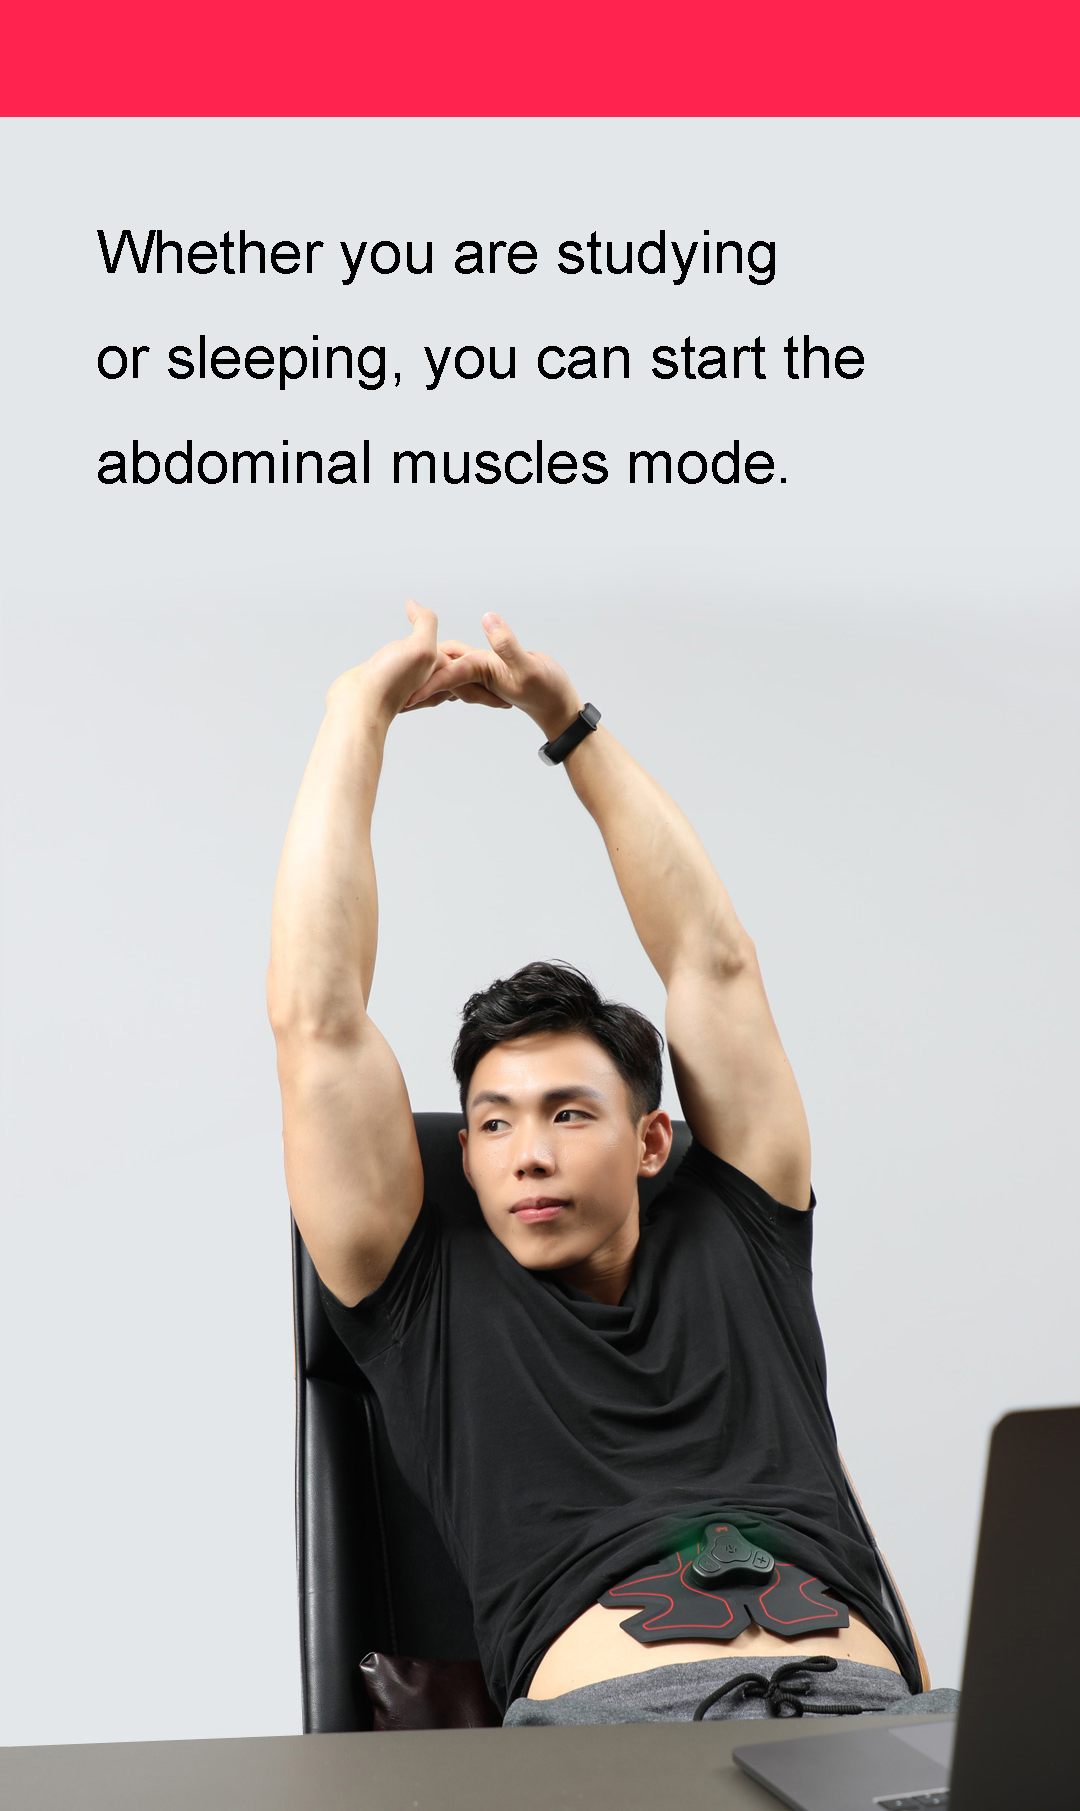 Move-It-Abdominal-Muscle-Trainer-Rechargeable-Wireless-EMS-Stimulator-Fitness-Body-Shaping-1510496-3